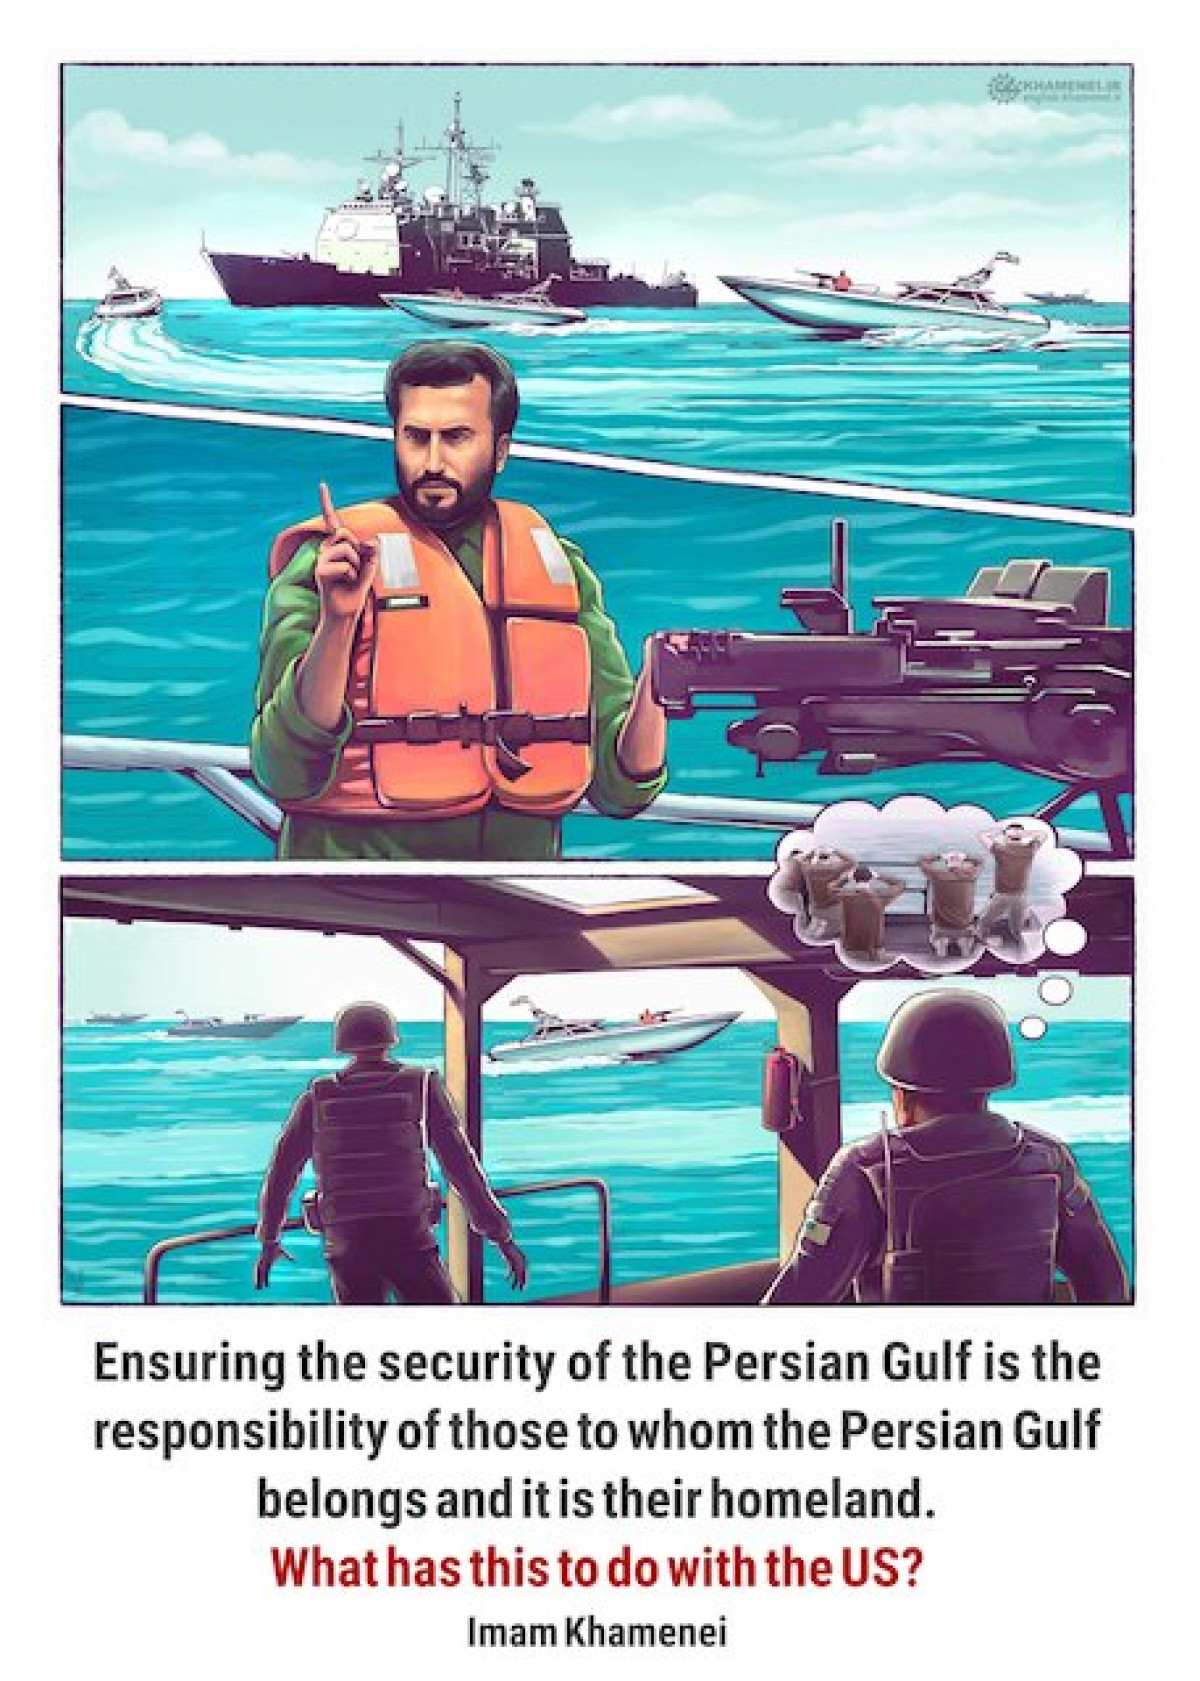 Ensuring the security of the Persian Gulf is the responsibility of those to whom it belongs